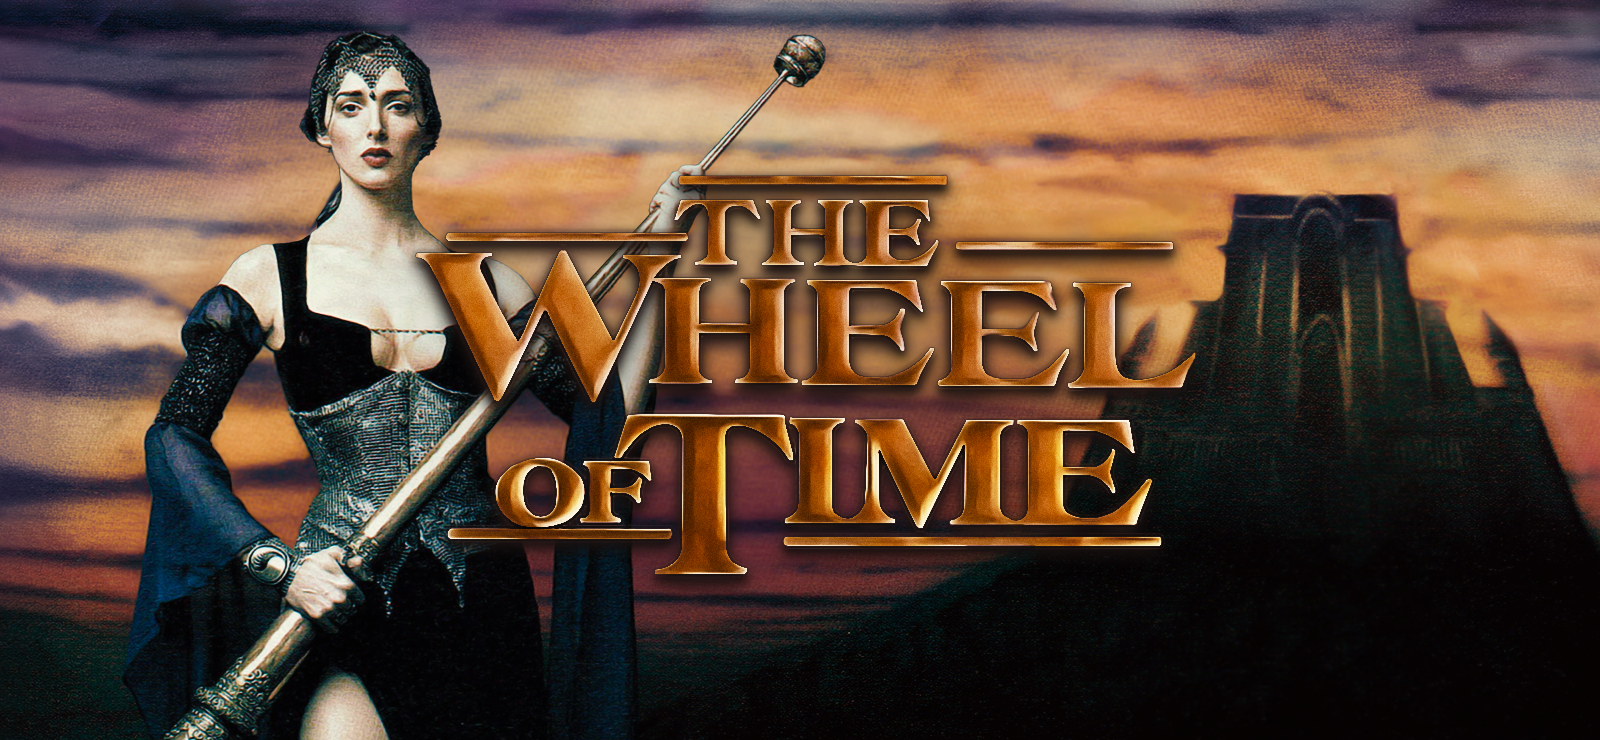 The Wheel Of Time